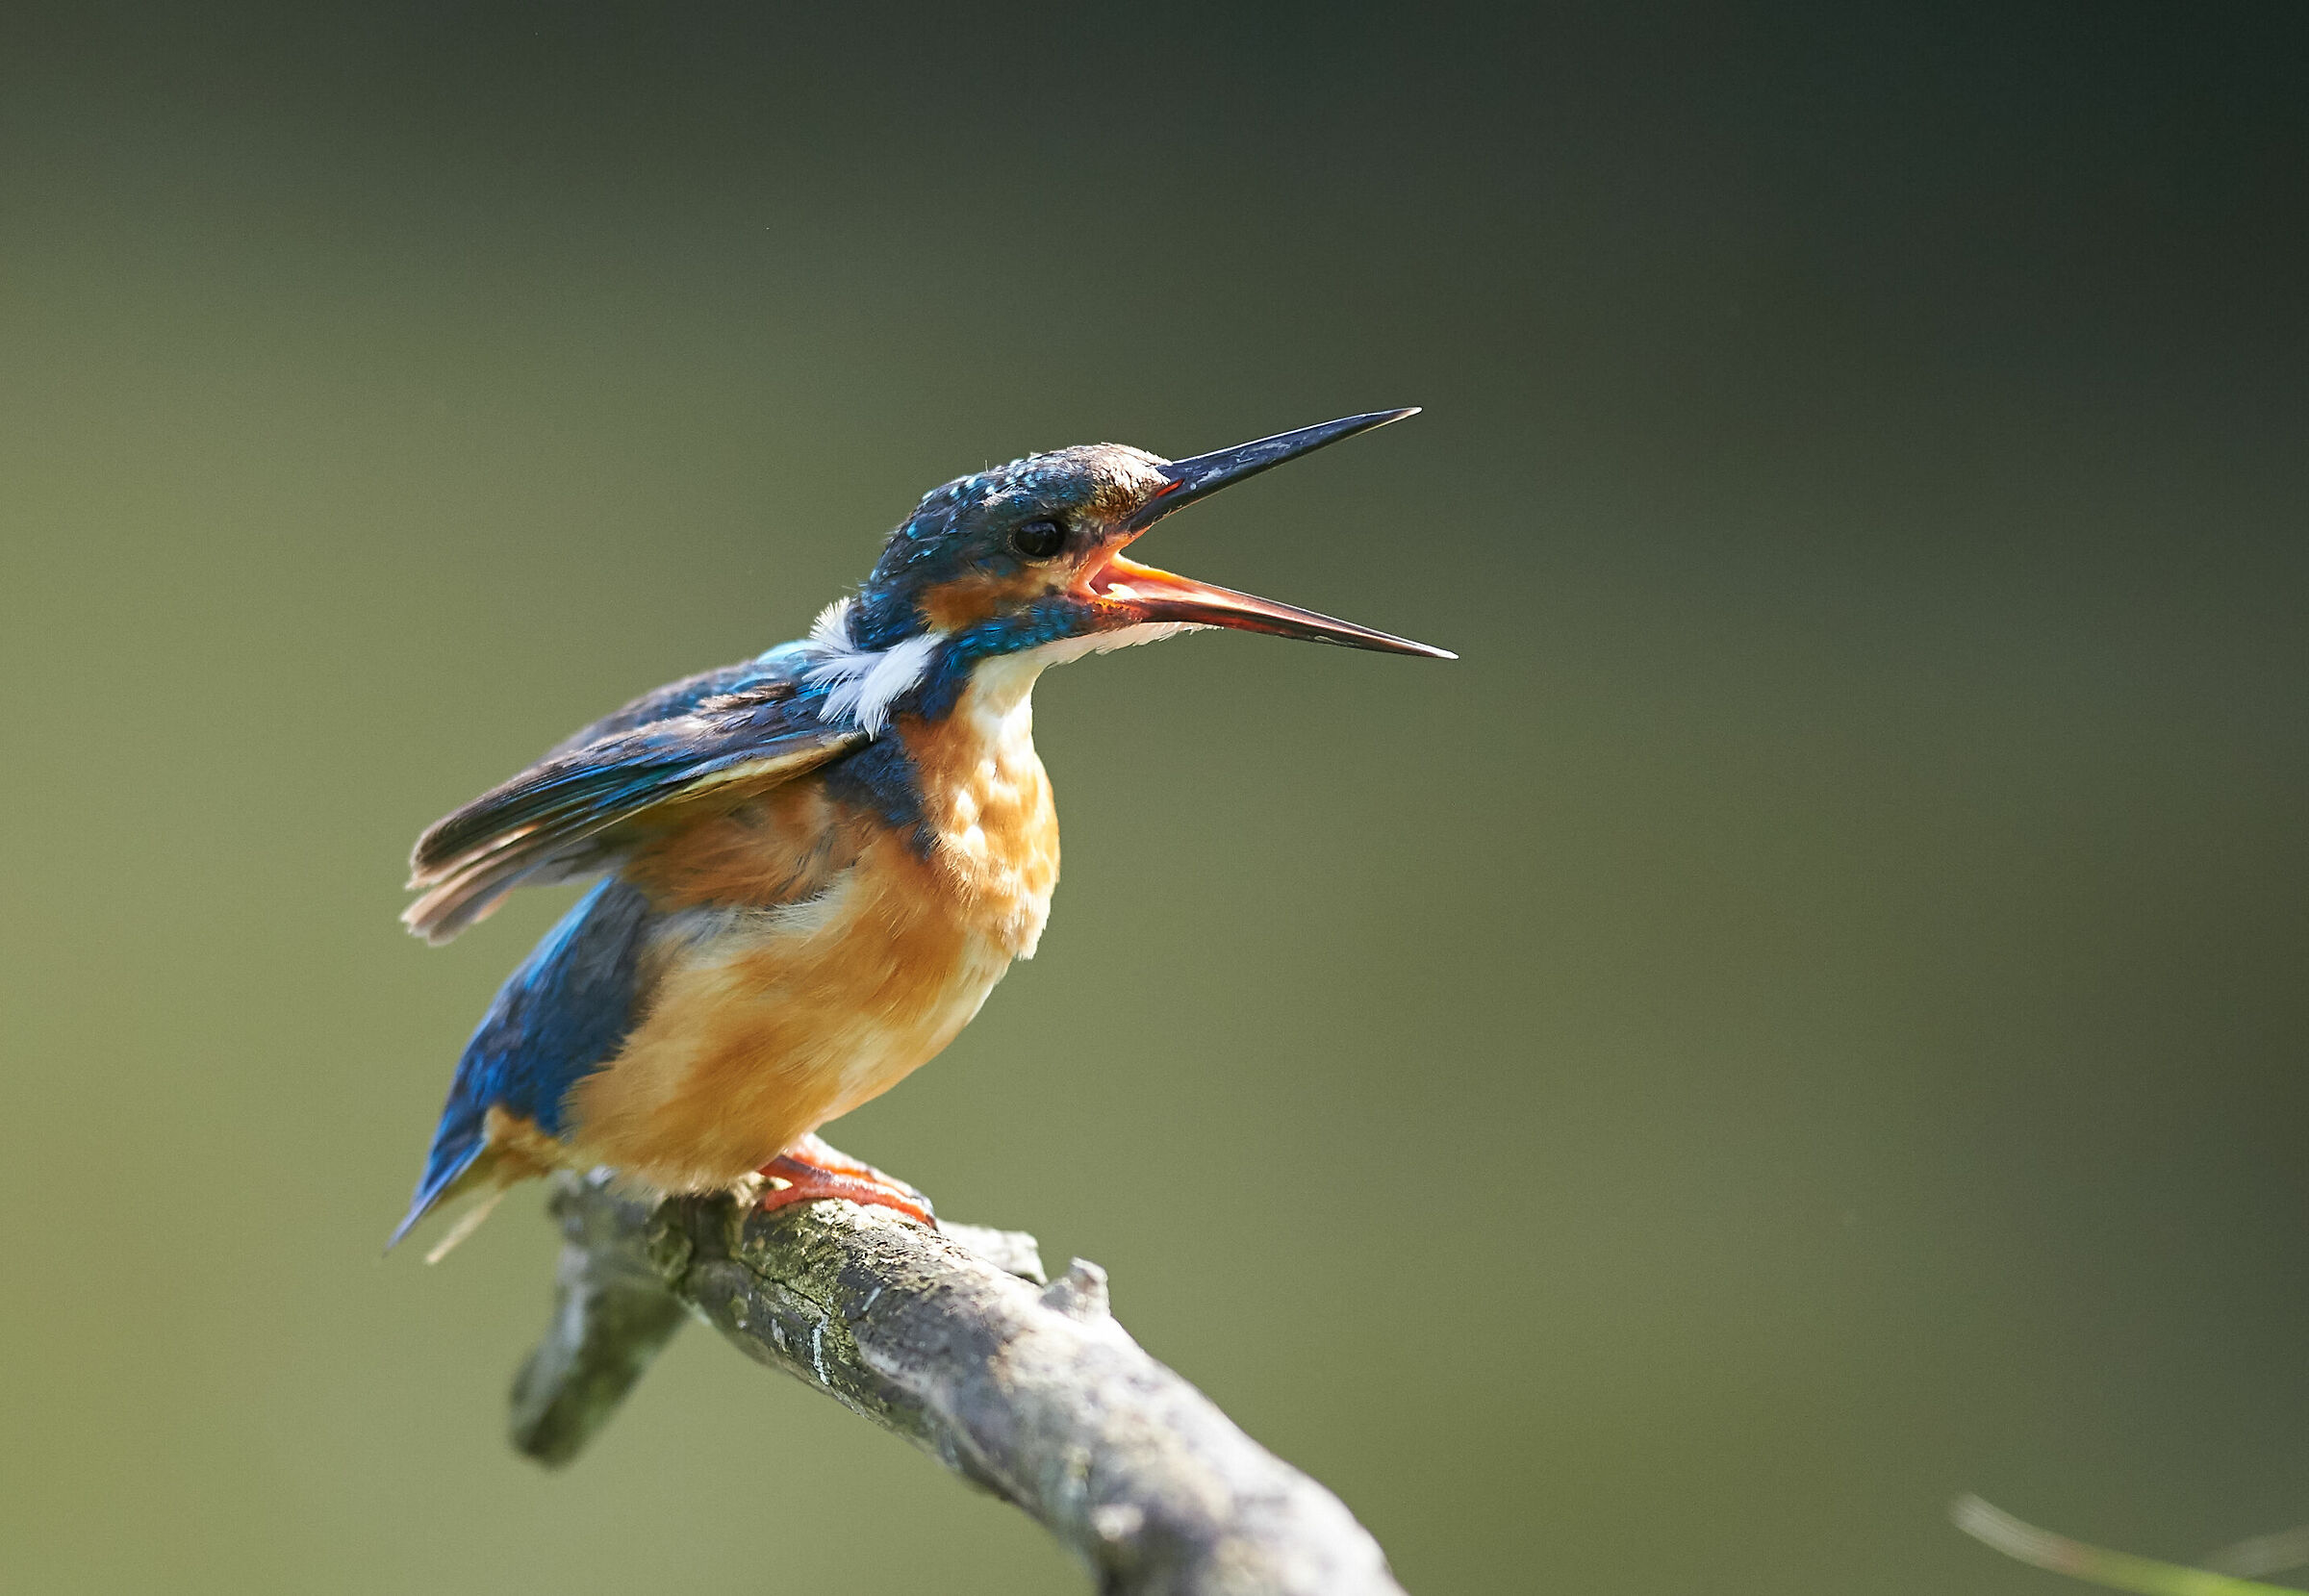 Juvenile Kingfisher wants to be fed...